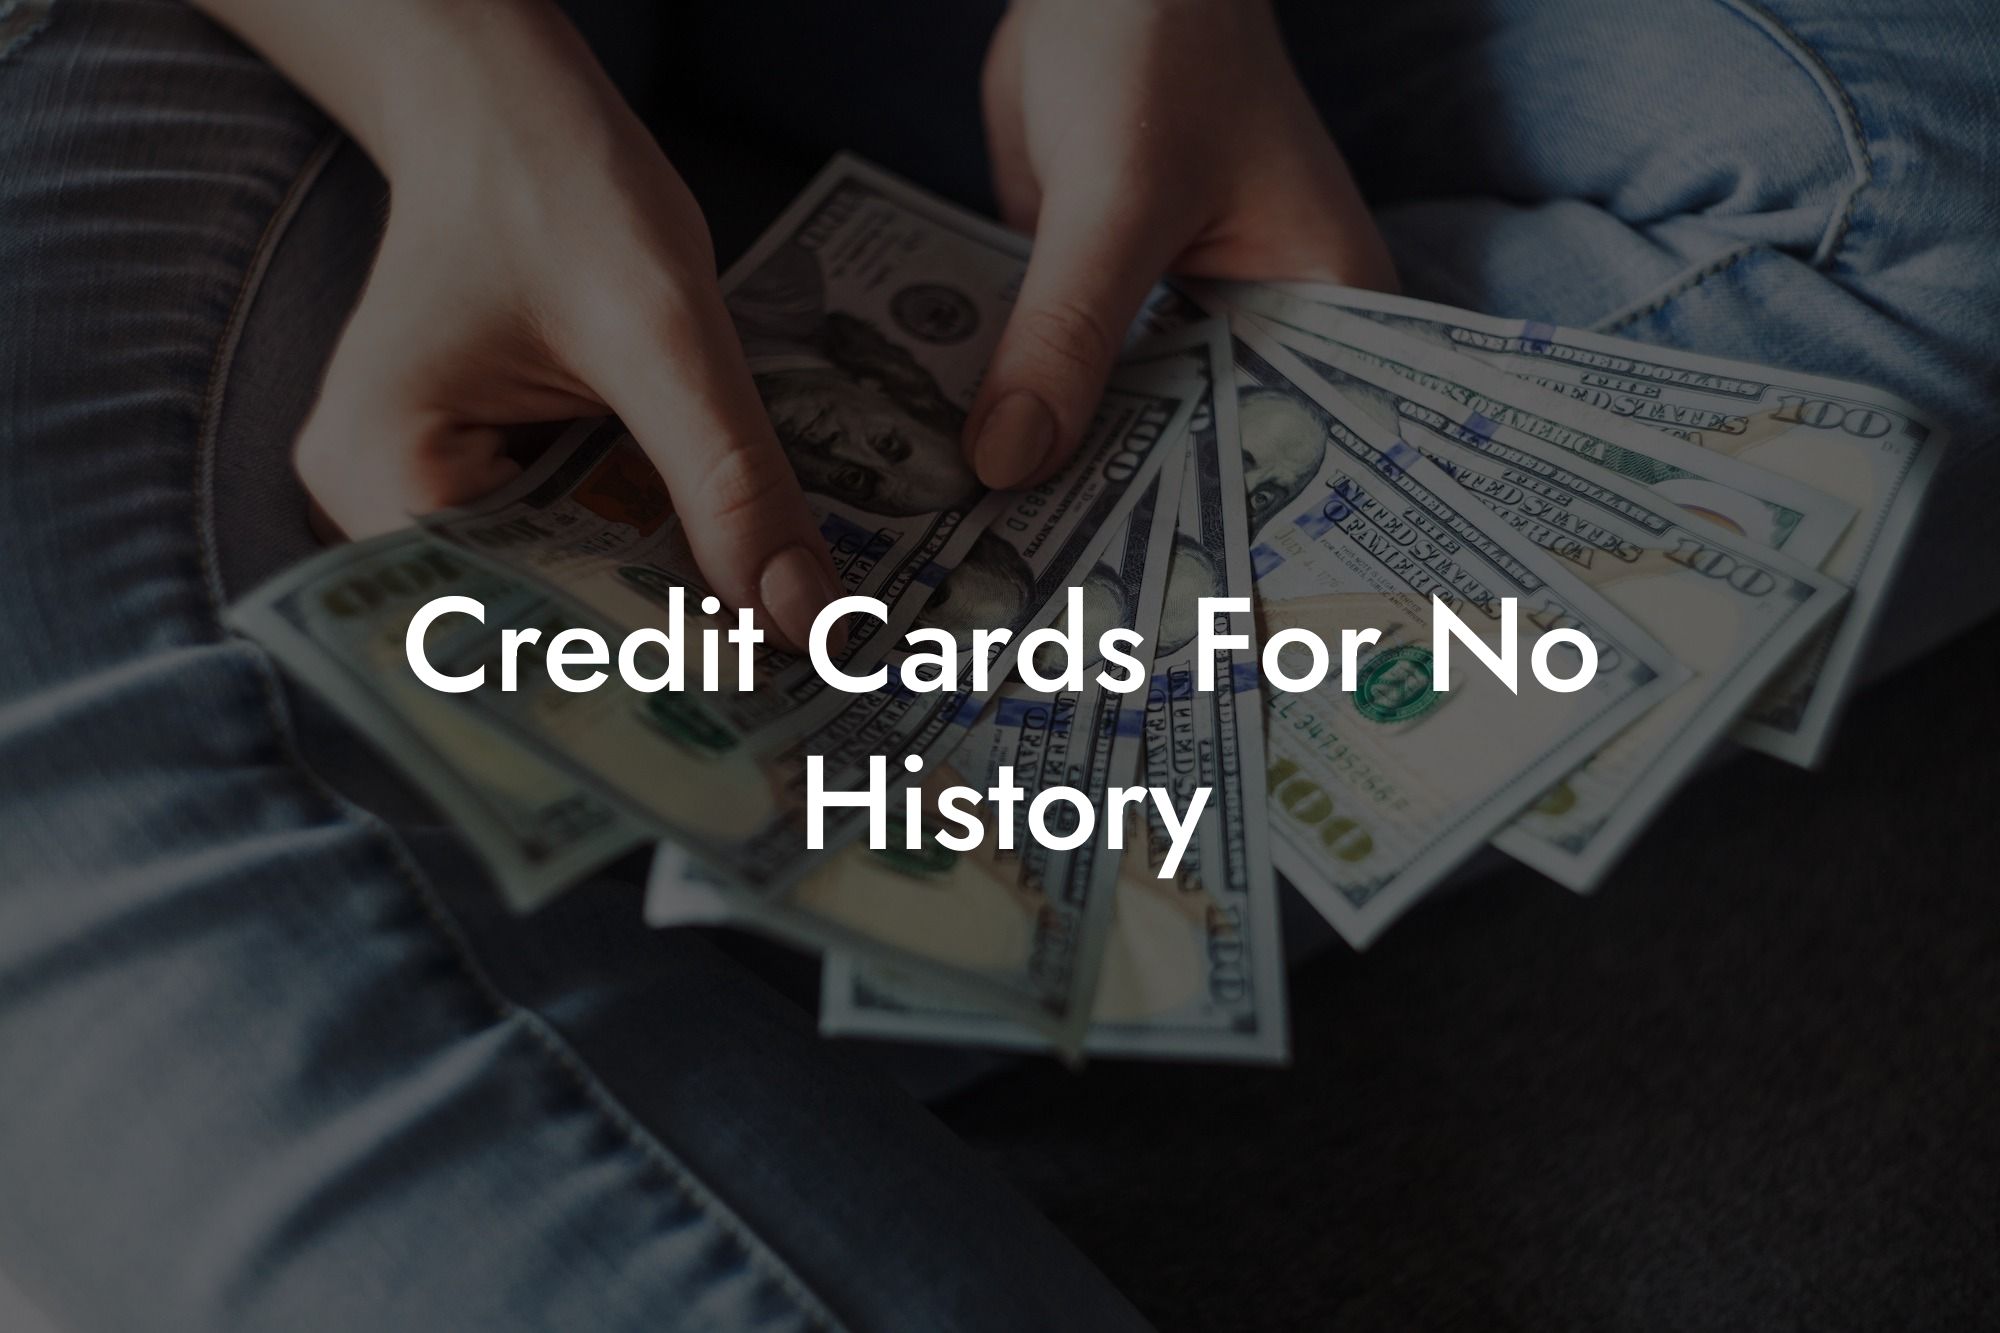 Credit Cards For No History